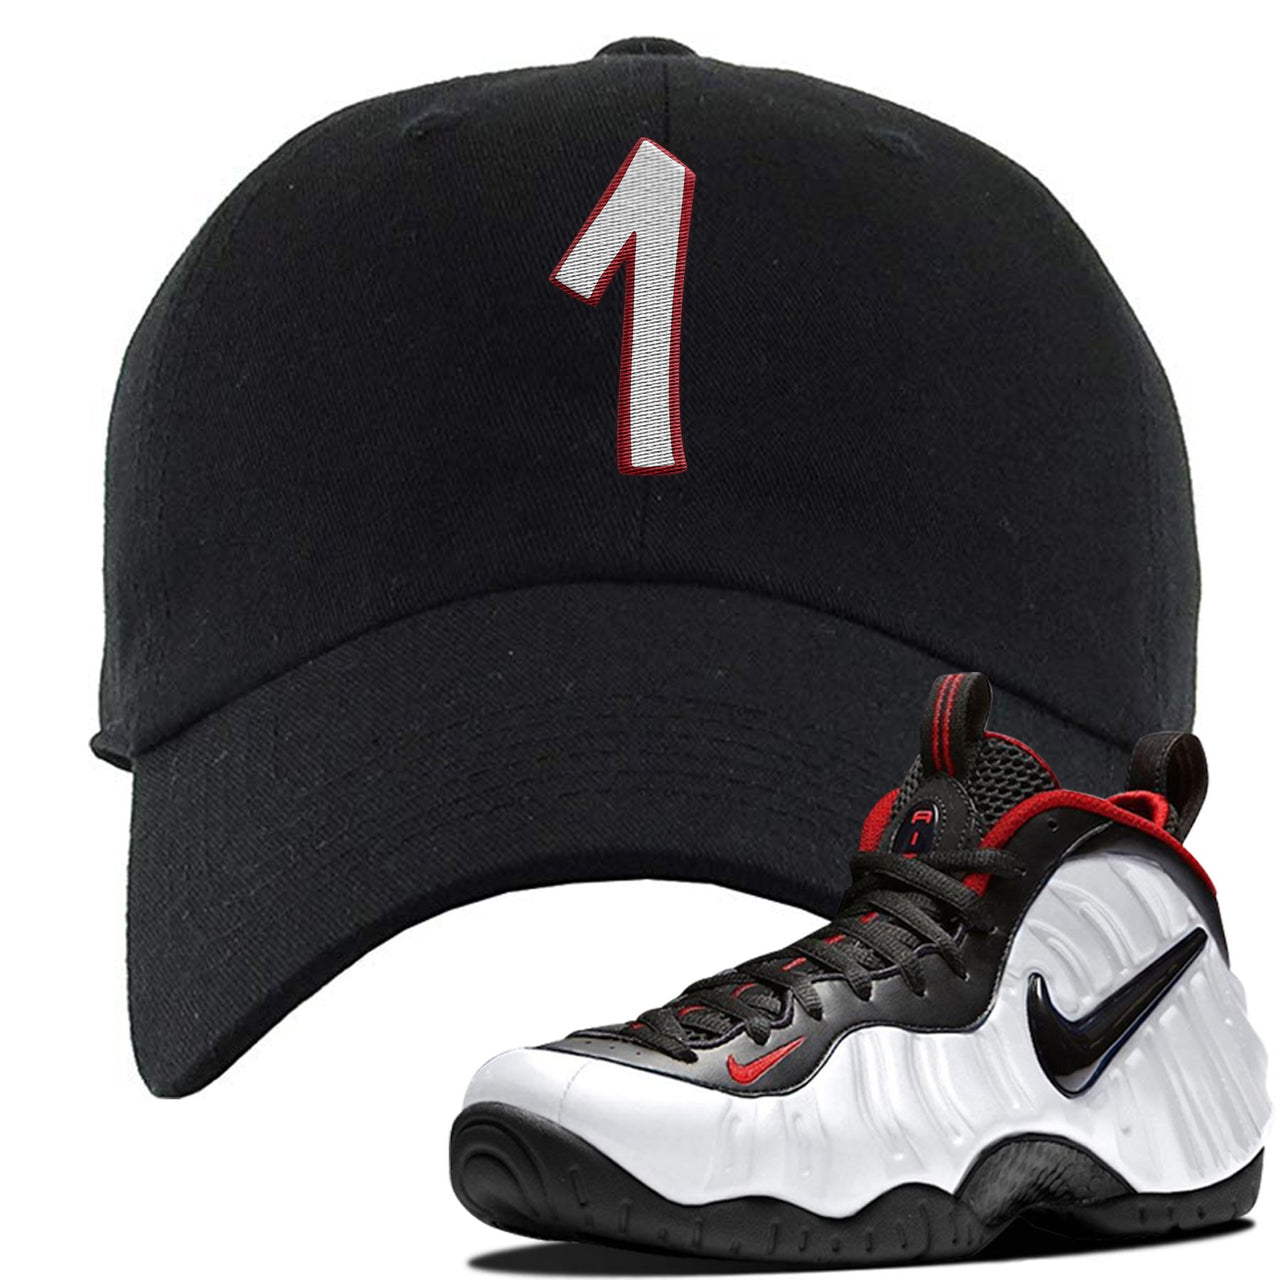 Foamposite Pro White Black University Red Sneaker Black Dad Hat | Hat to match Nike Air Foamposite Pro White Black University Red Shoes | Penny One